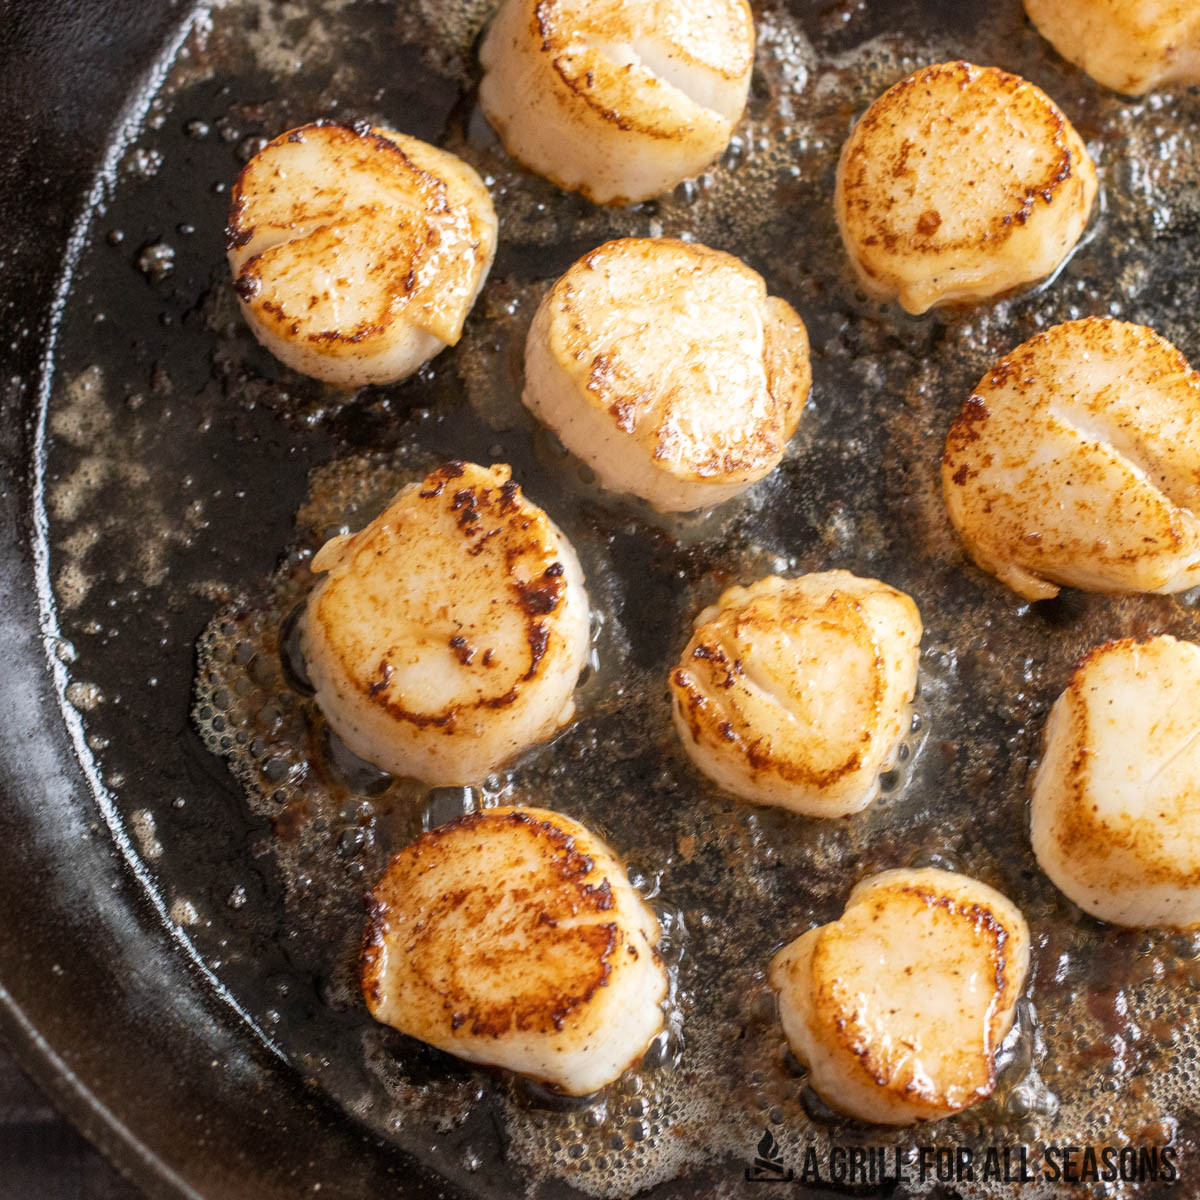 WOW FACTOR 
You may not immediately think of coffee n scallops as the perfect partners ...but think again 
I was pleasantly surprised how many recipes there are out there 
Sweetness of scallop balanced by the bitterness of coffee #matchmadeinheaven #coffeeinfusedoil 
R x